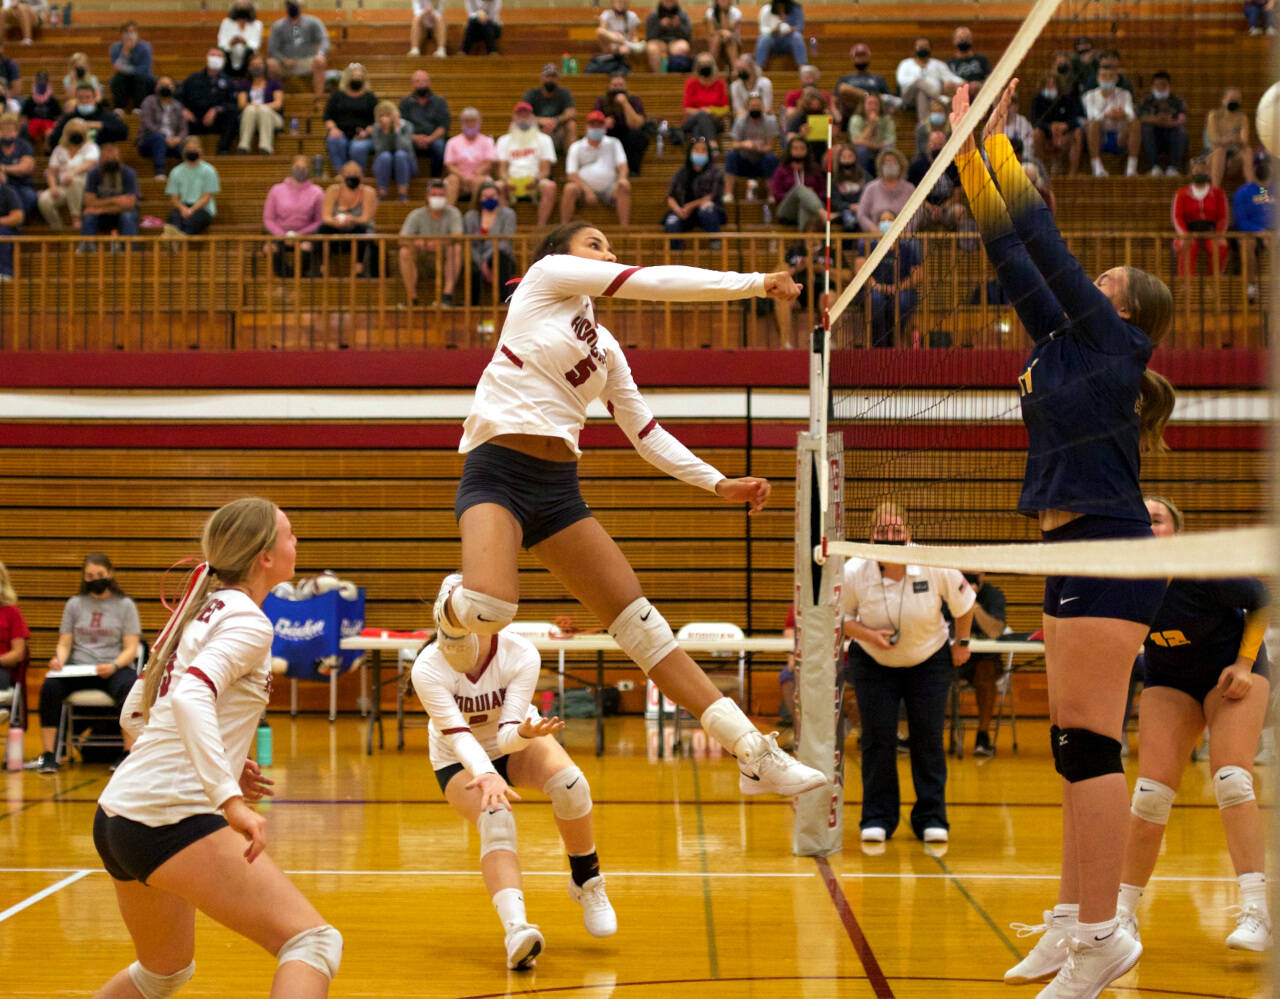 PHOTO BY PATTI REYNVAAN Hoquiam’s Chloe Kennedy (5) rises for a kill during the Grizzlies’ straight-set, season-opening victory over Aberdeen on Tuesday in Hoquiam.